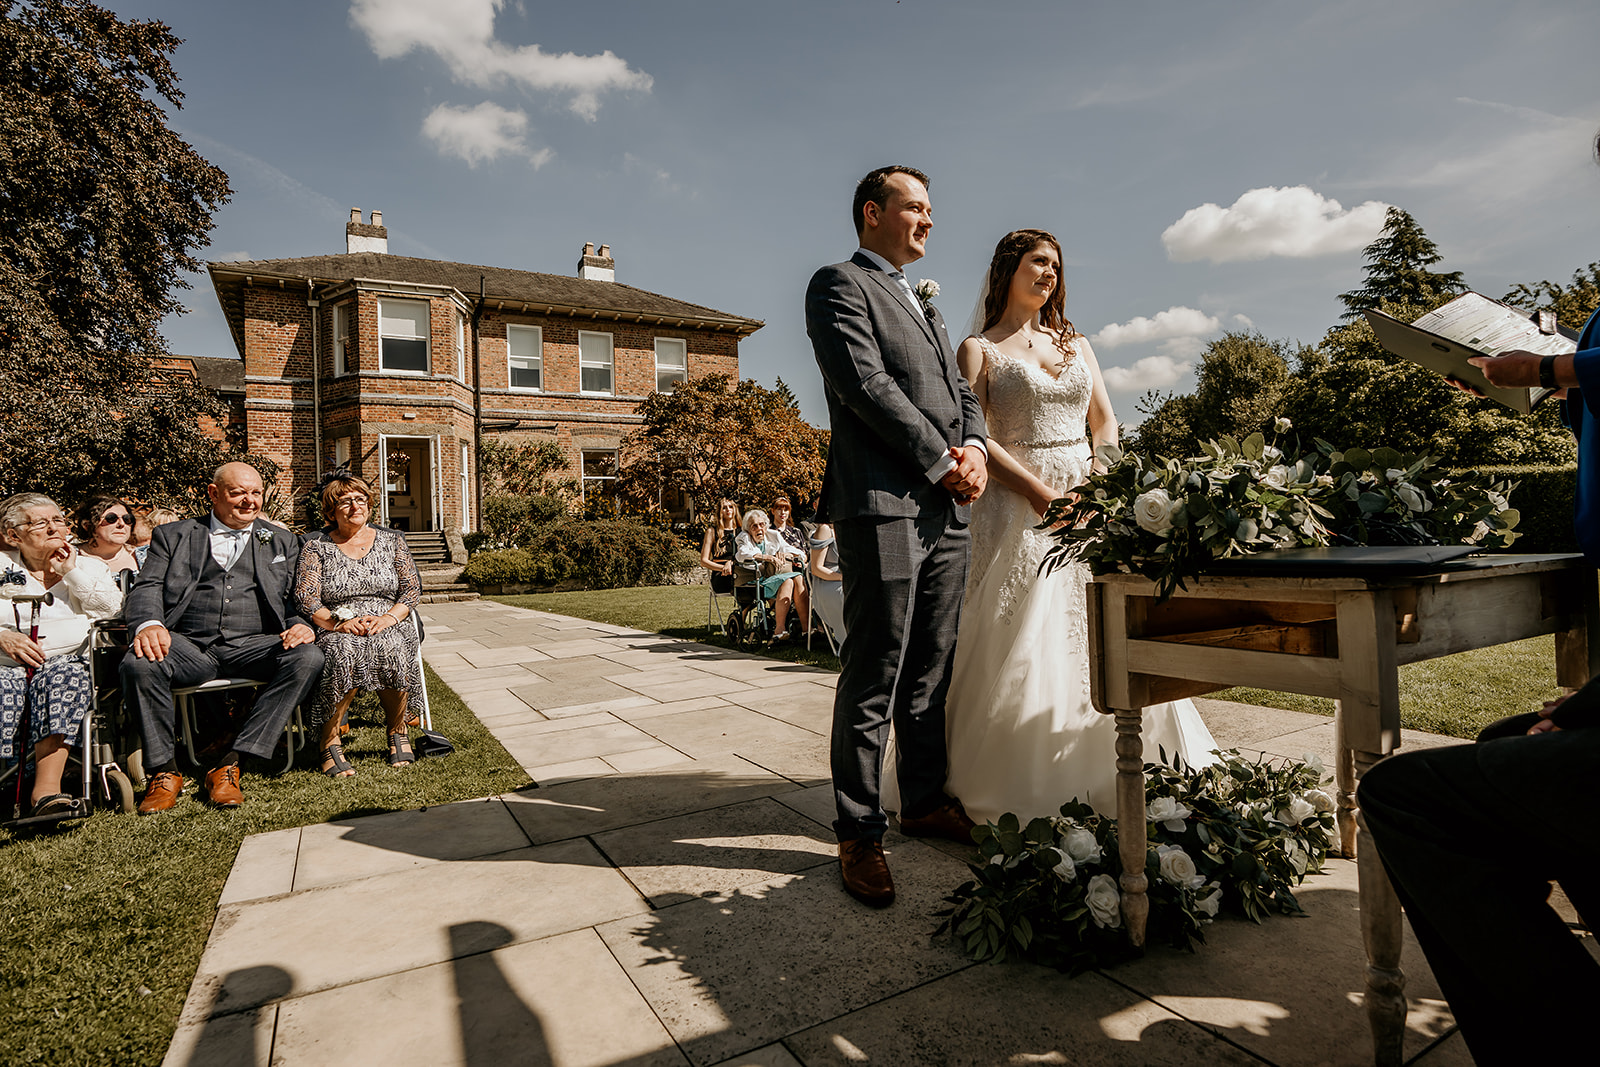 Outdoor ceremony at Shottle Hall